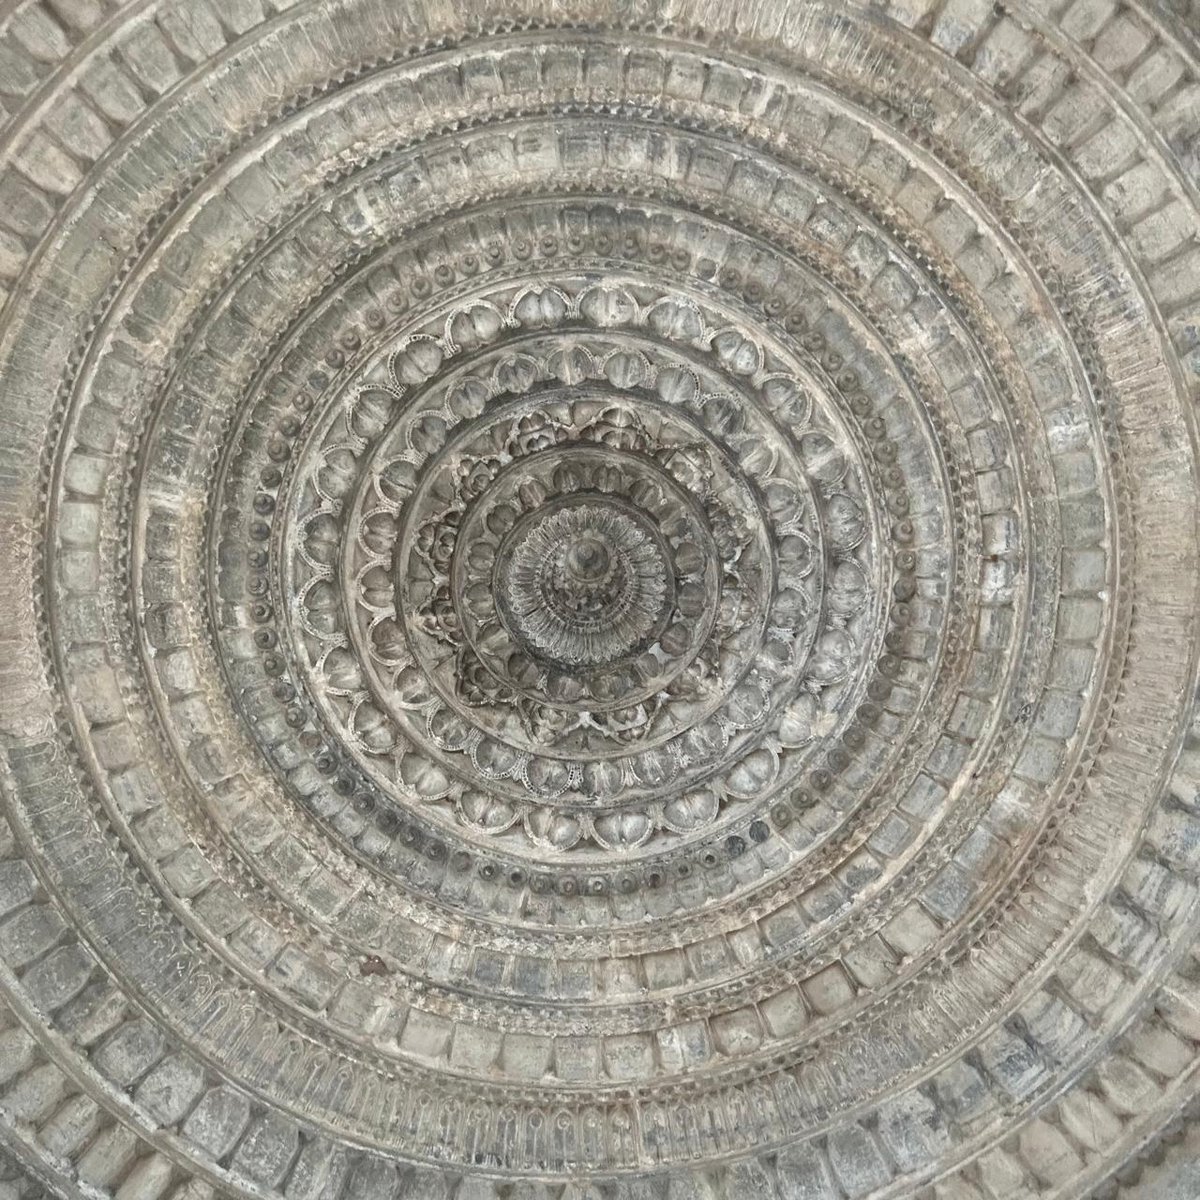 Amazing artwork on lime stone that is reflected beautifully in wall, column &   ceiling at various monuments & best example Indian architecture.

#MinistryofTourism @Swadesh_Darshan #incredibleindia #indiatourism #sustainabletourism #responsibletourism #dekhoapnadesh